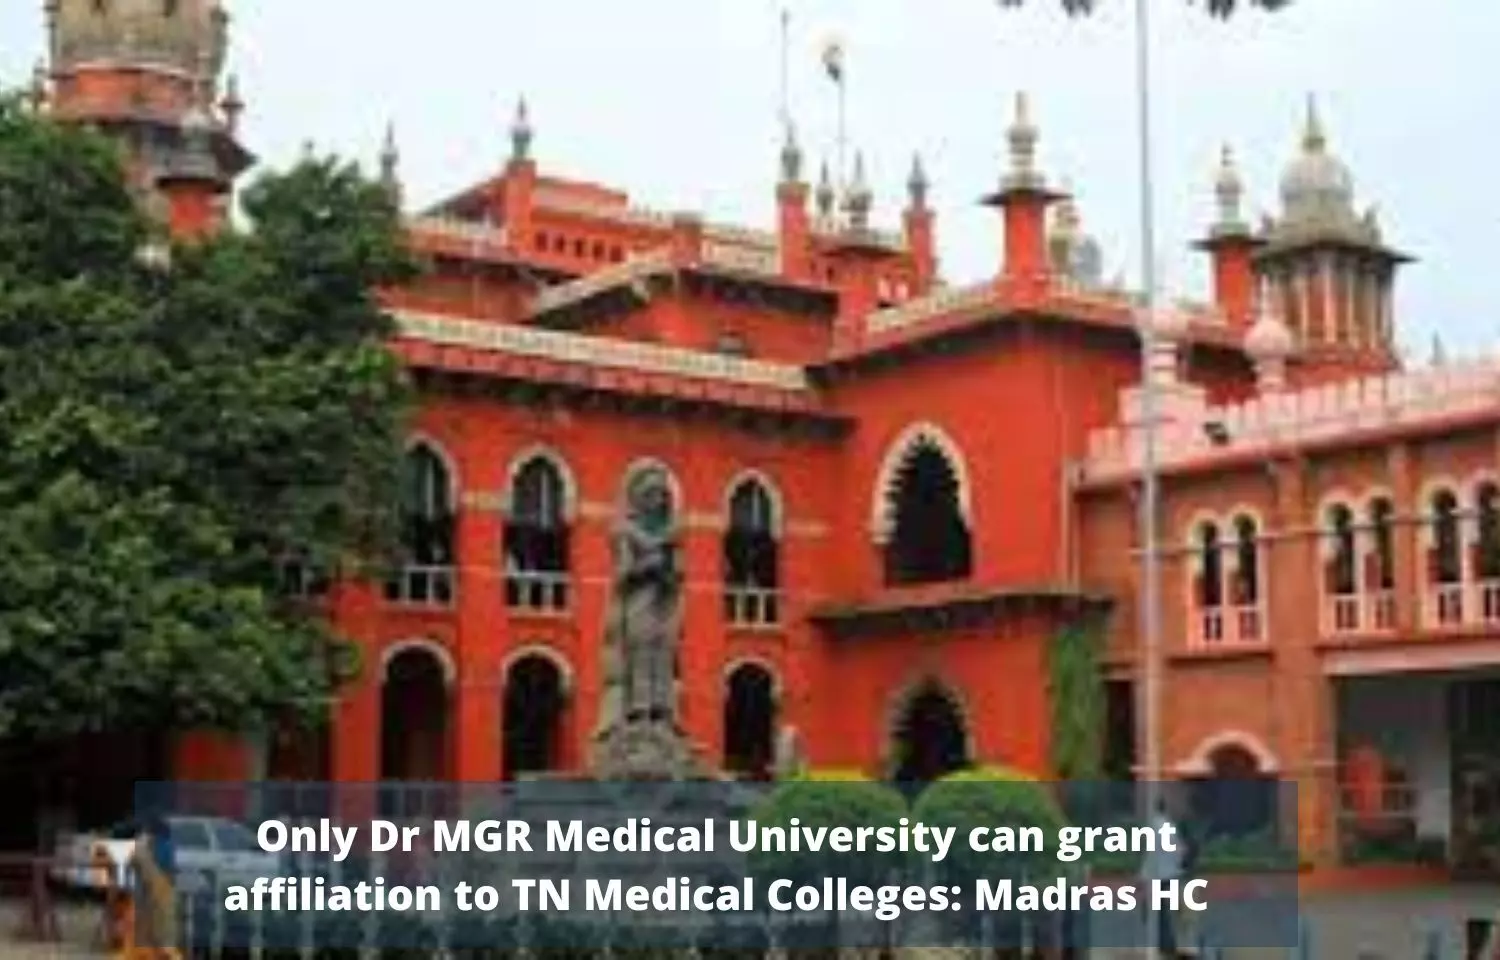 Only Dr MGR Medical University can grant affiliation to TN Medical Colleges: Madras HC disagrees with PPP Model